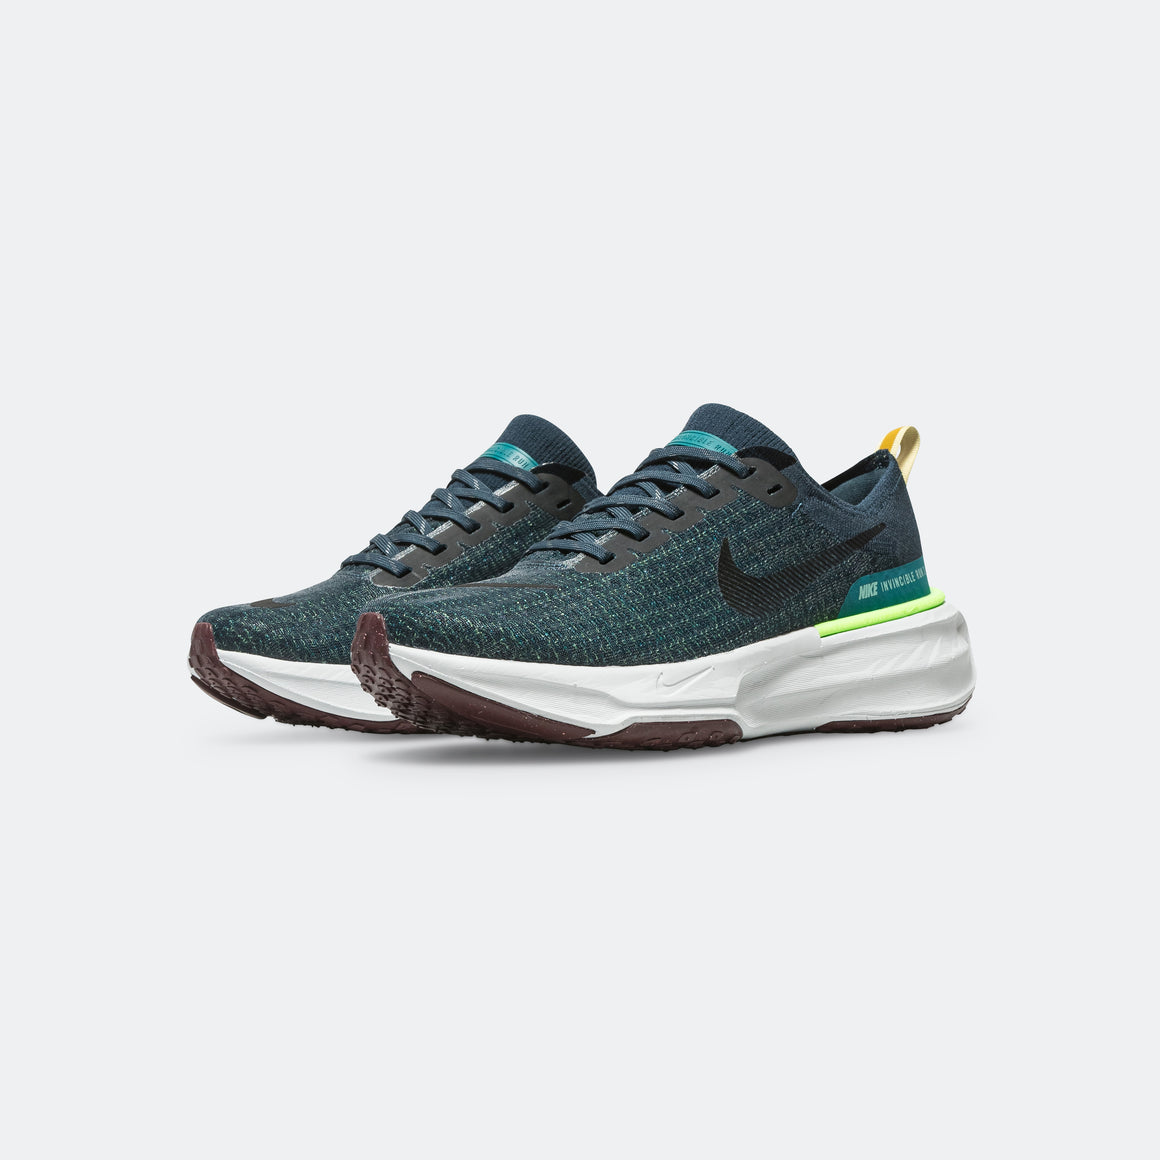 Nike - Mens ZoomX Invincible Run FK 3 - Armory Navy/Black-Geode Teal-Buff Gold - Up There Athletics